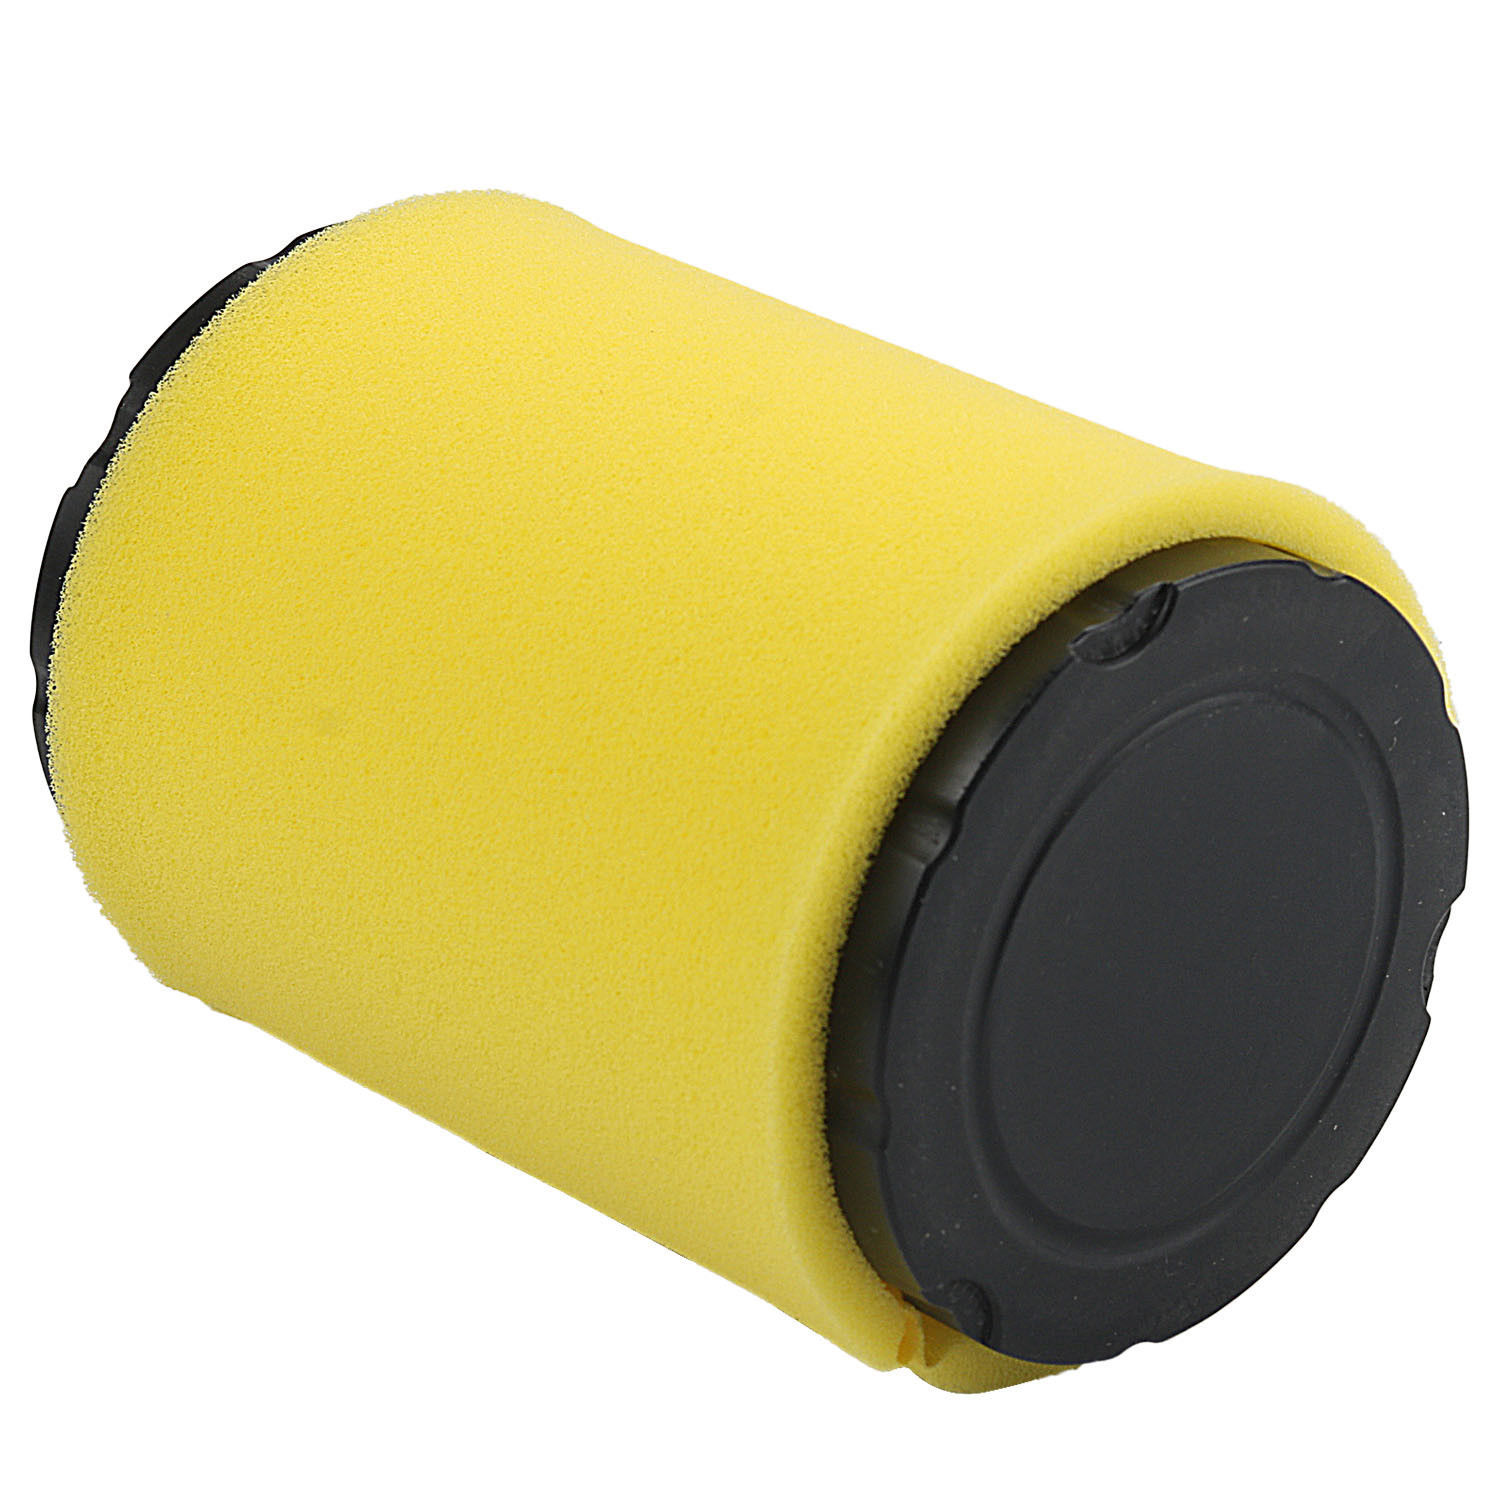 Replaces John Deere GY21435 Air Filter - $19.95